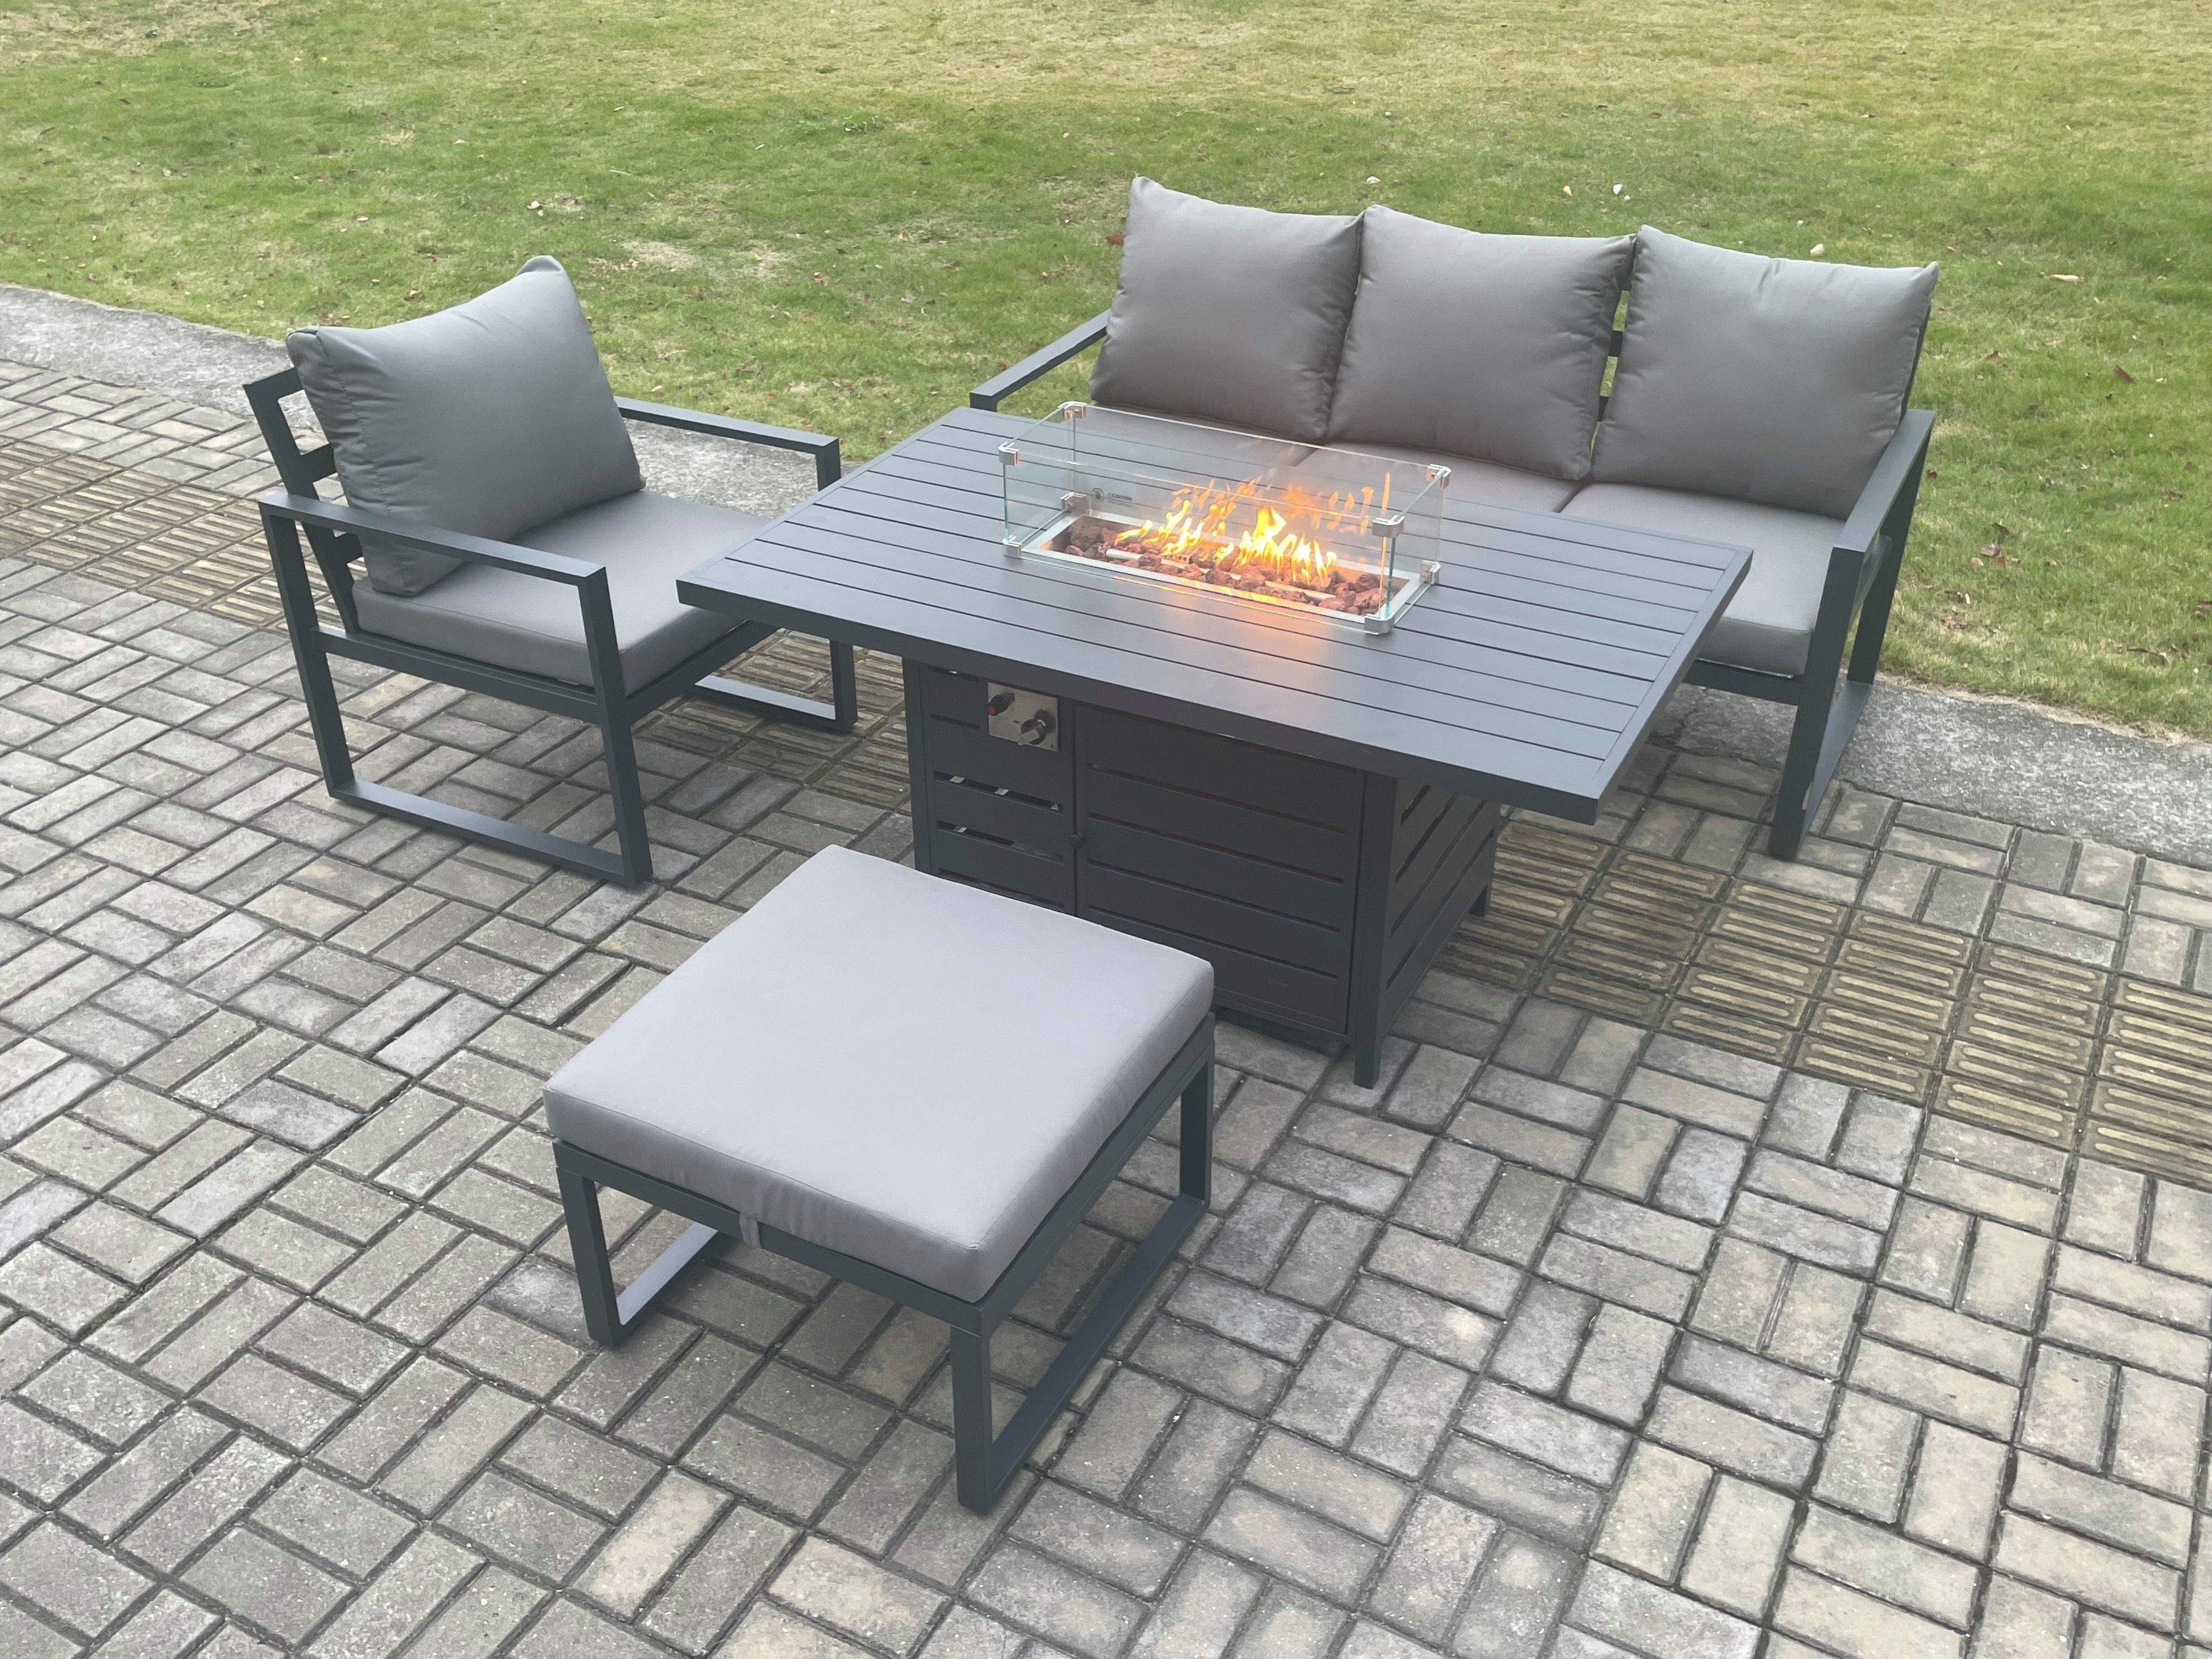 Aluminium Outdoor Garden Furniture Set Gas Fire Pit Dining Table Set Gas Heater Burner with Big Foot